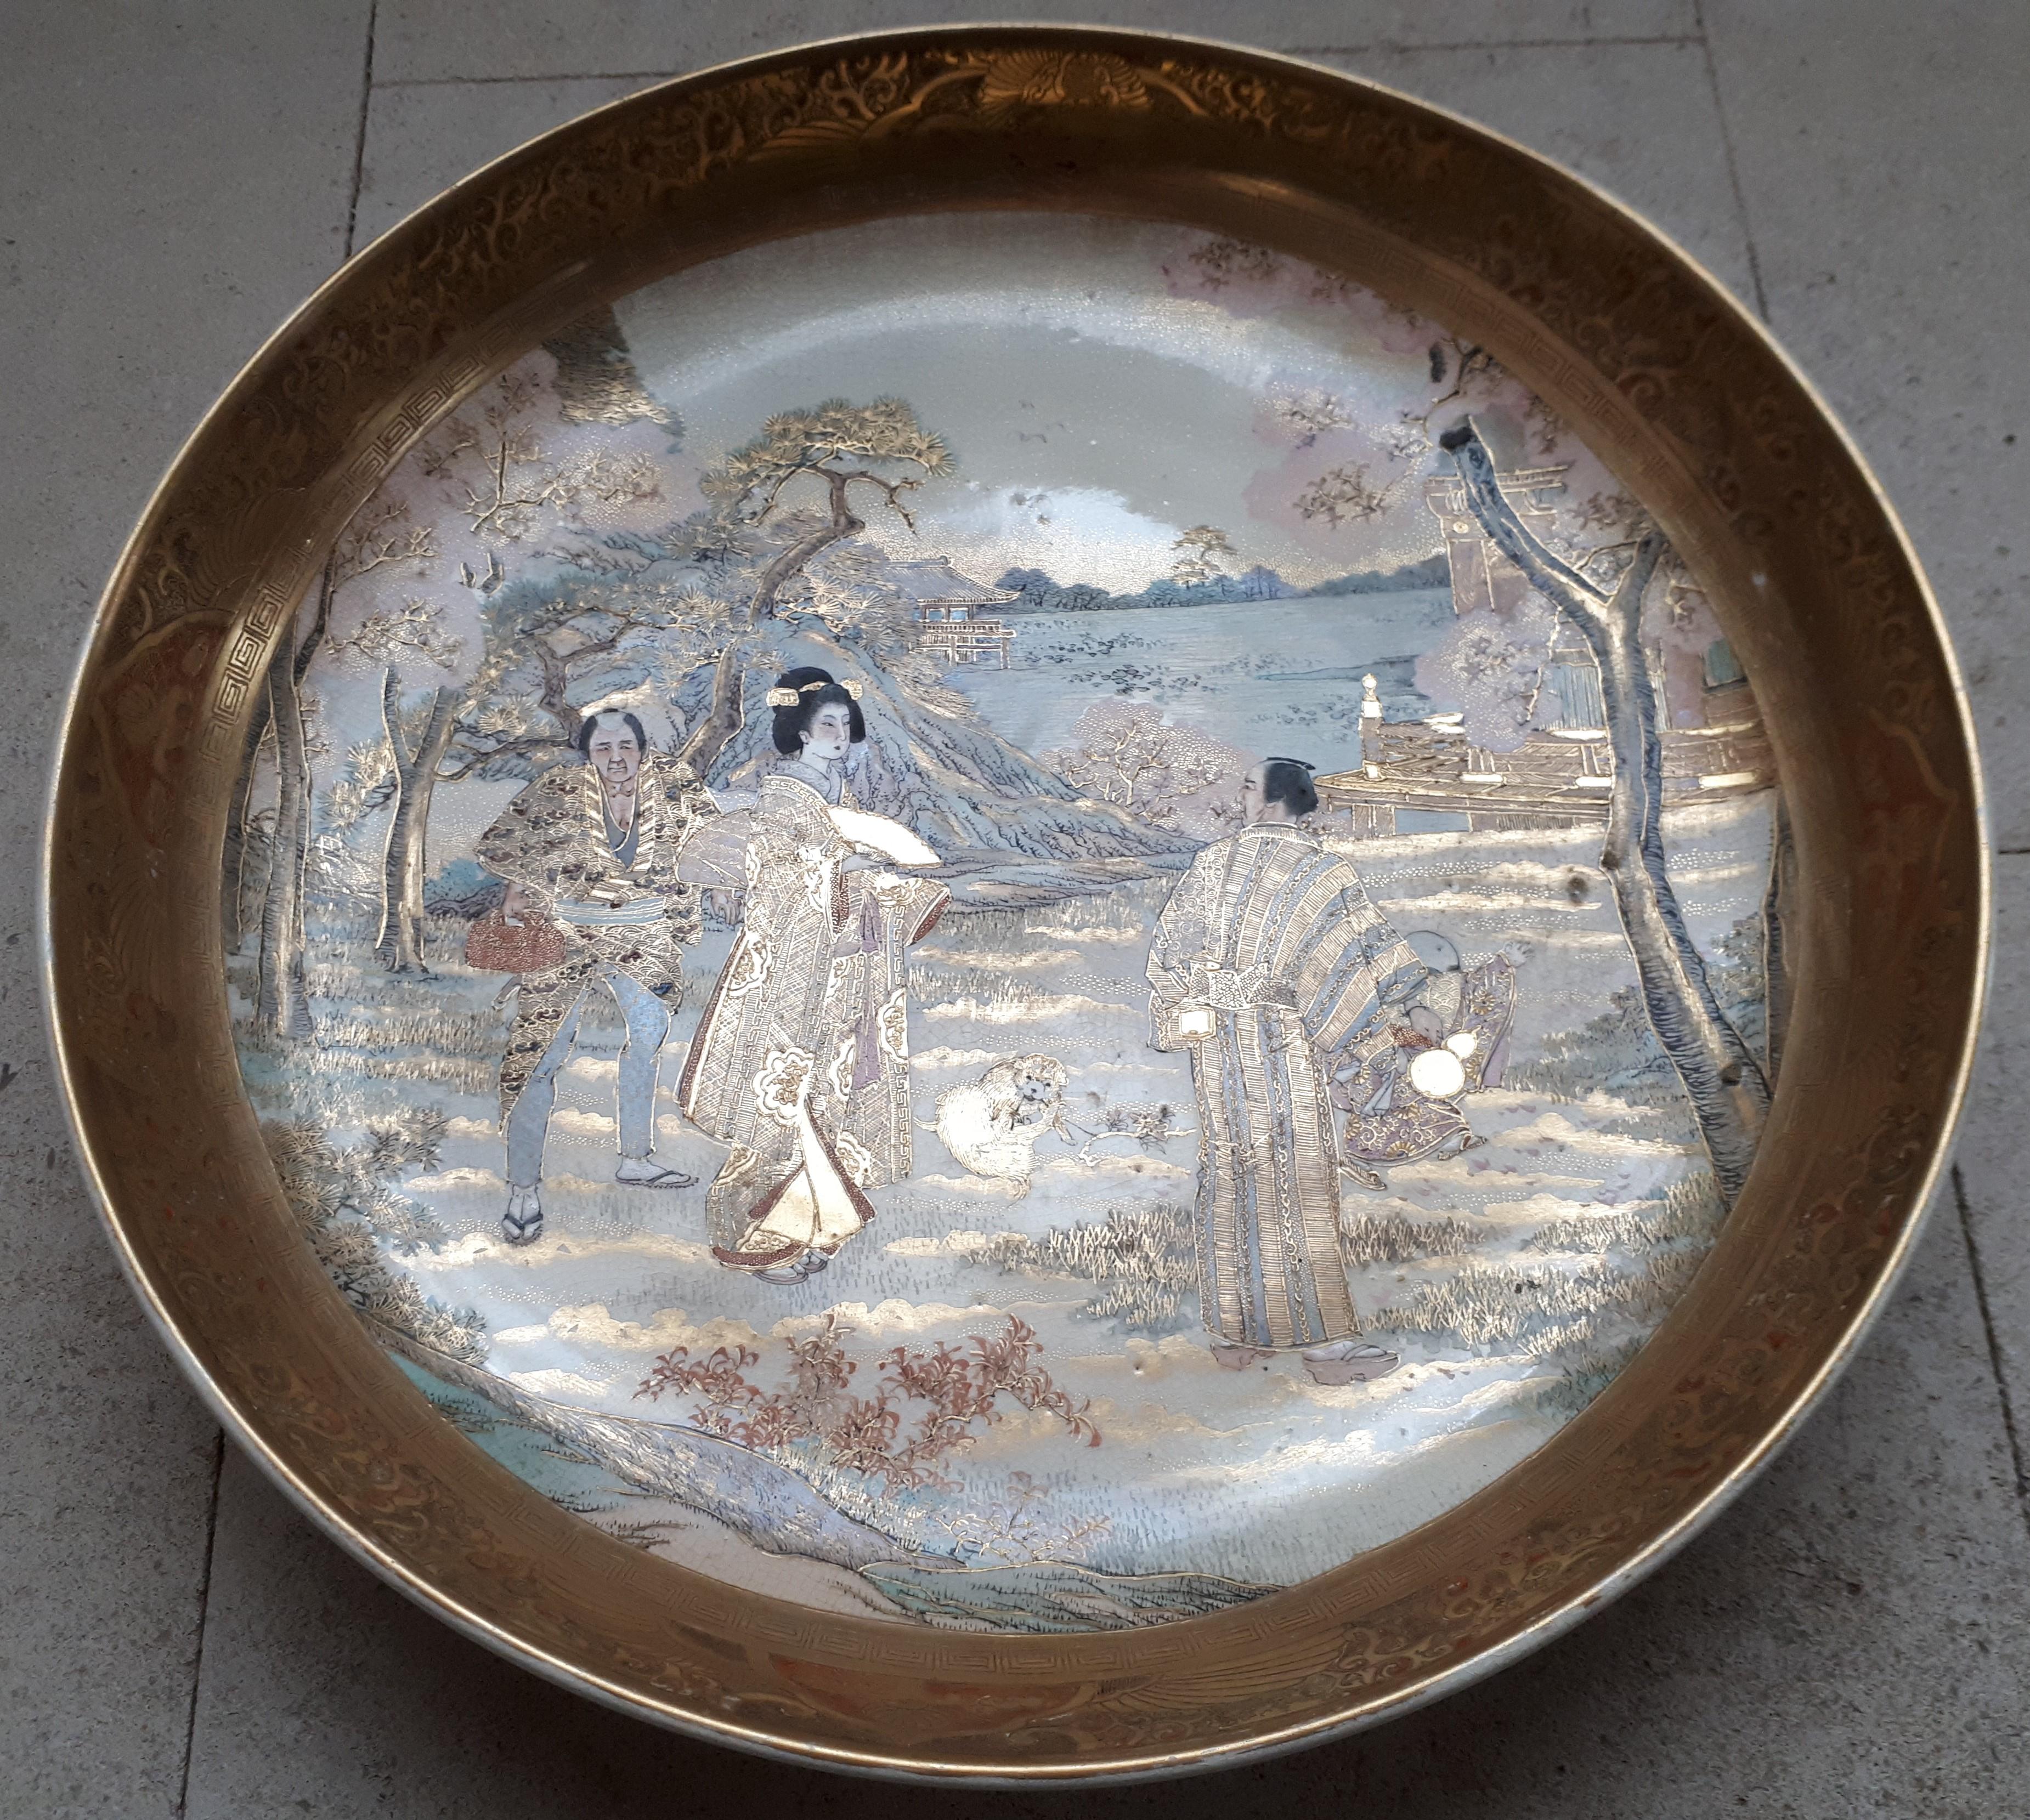 Exceptional Satsuma earthenware dish of incredible finesse.
A work of art which, without a doubt, required several dozen hours of meticulous work. But what a result !!!
Japan around 1900.